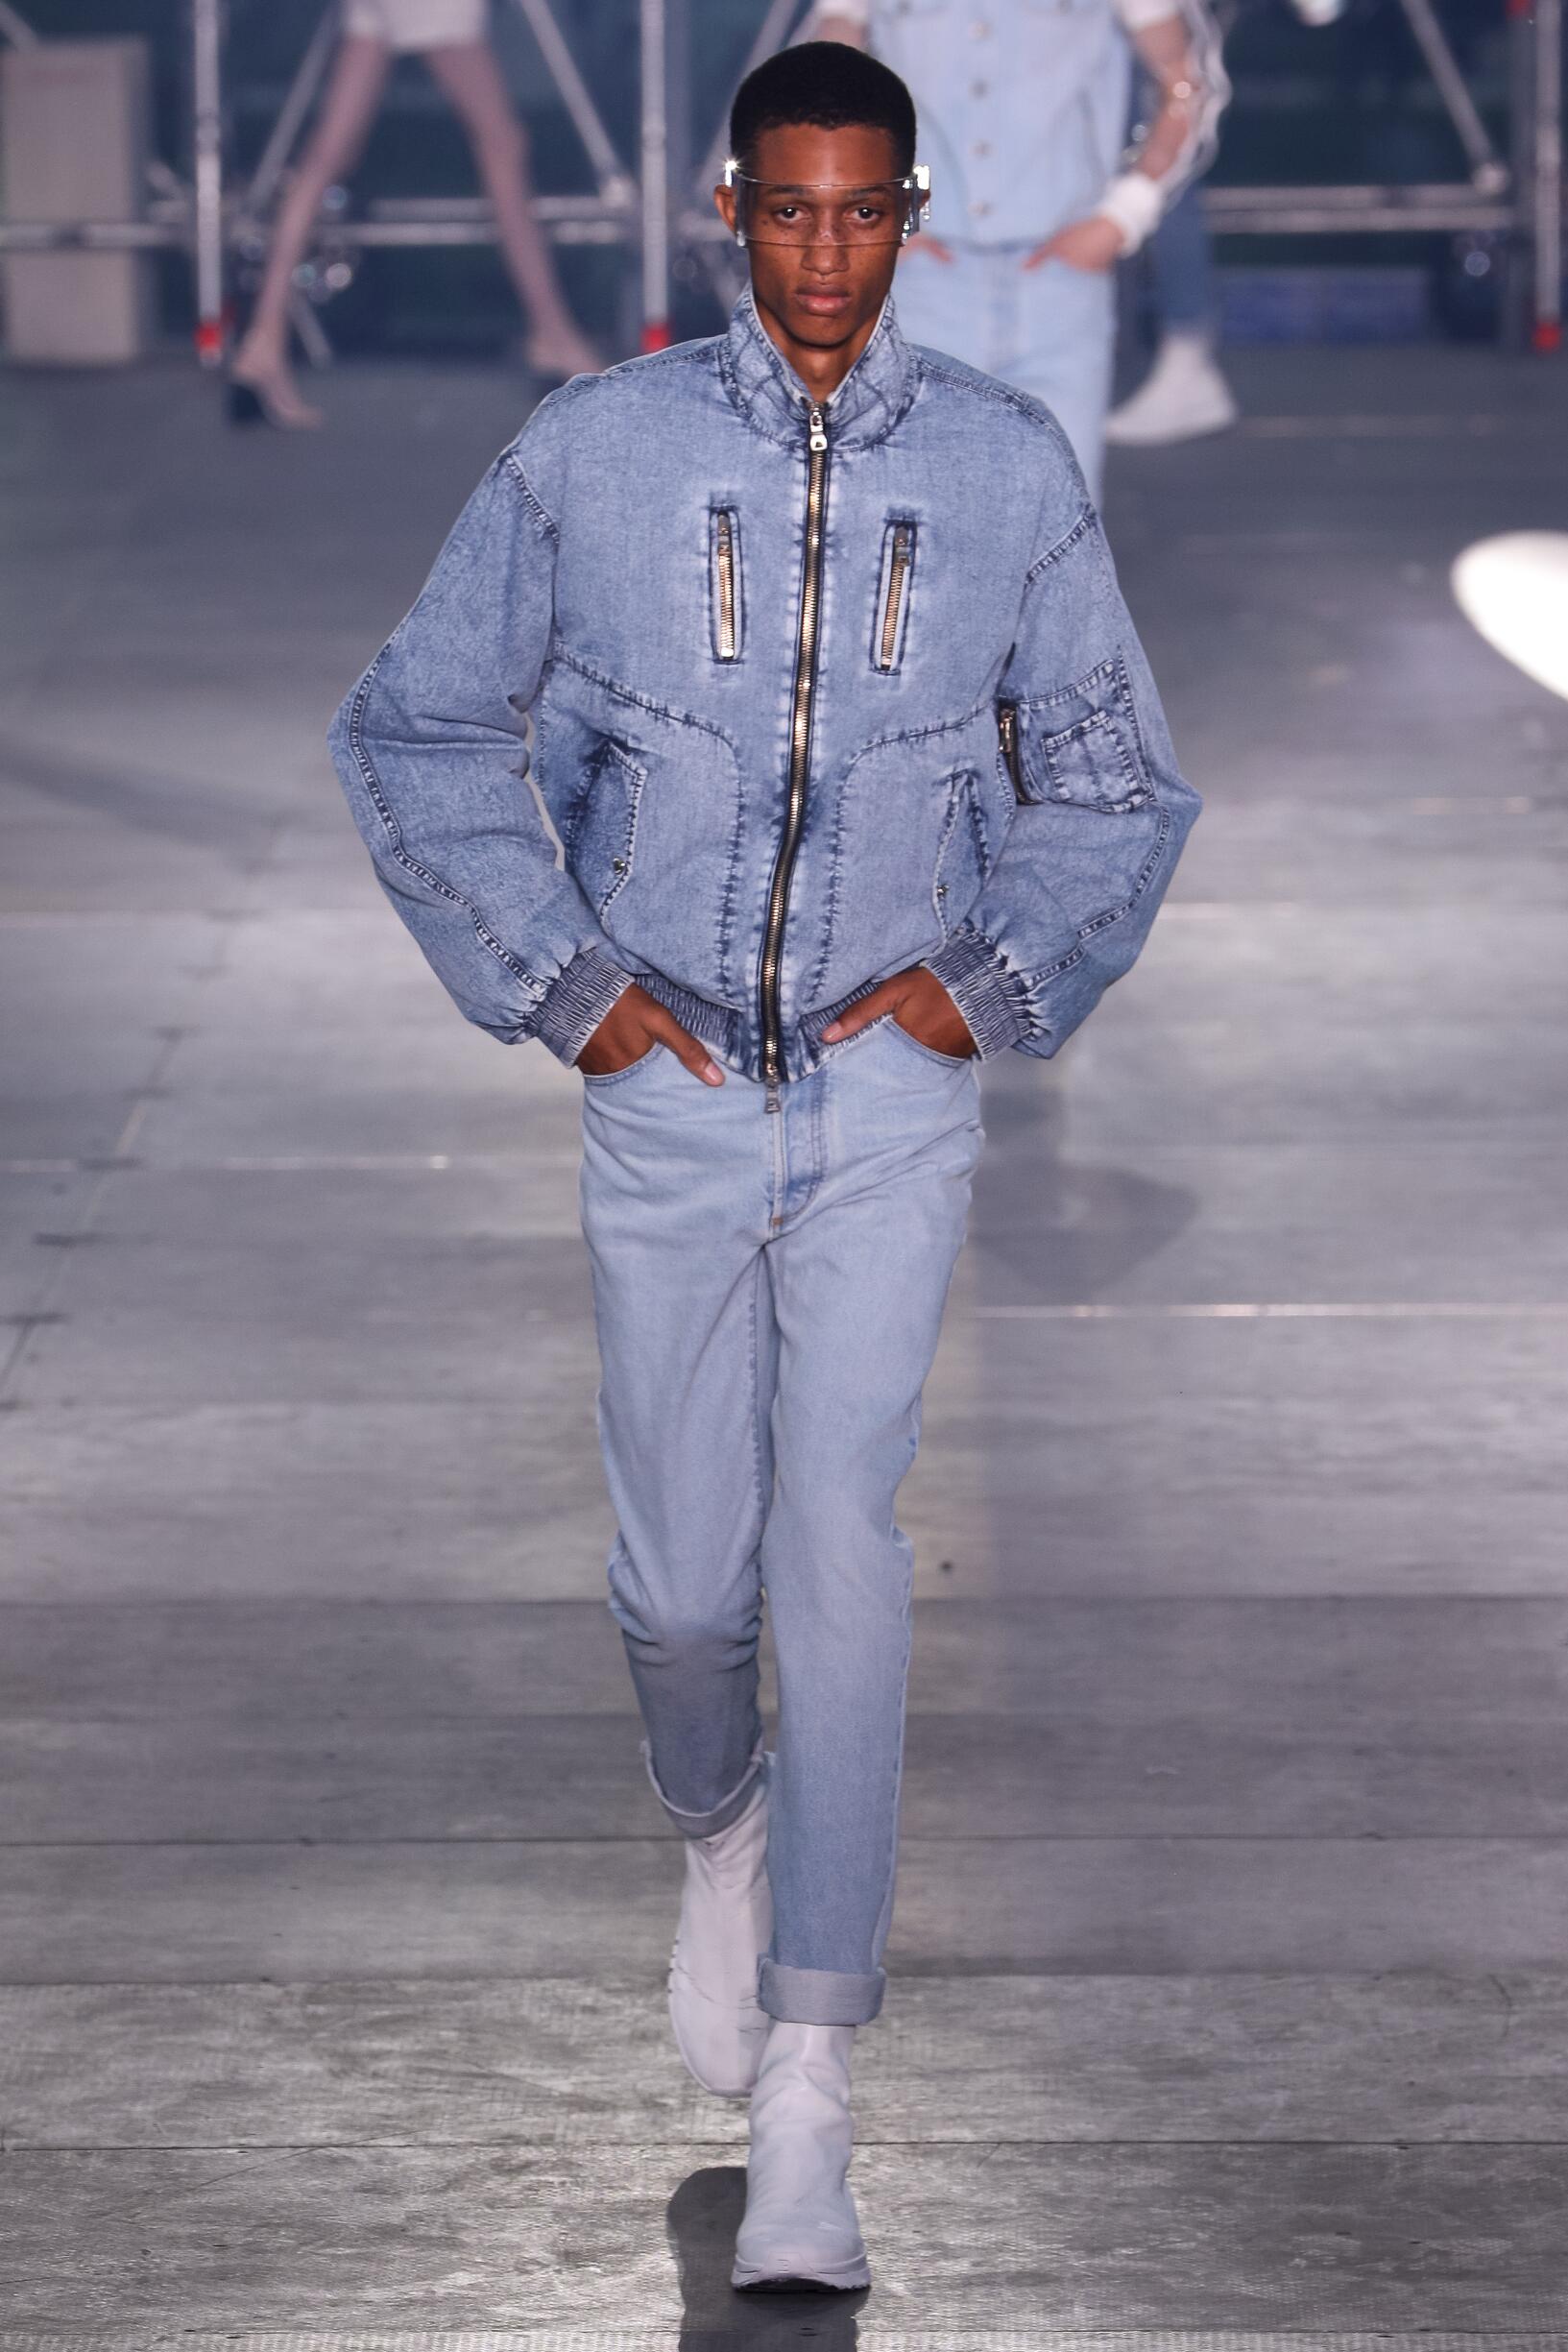 BALMAIN HOMME SPRING SUMMER 2020 COLLECTION | The Skinny Beep